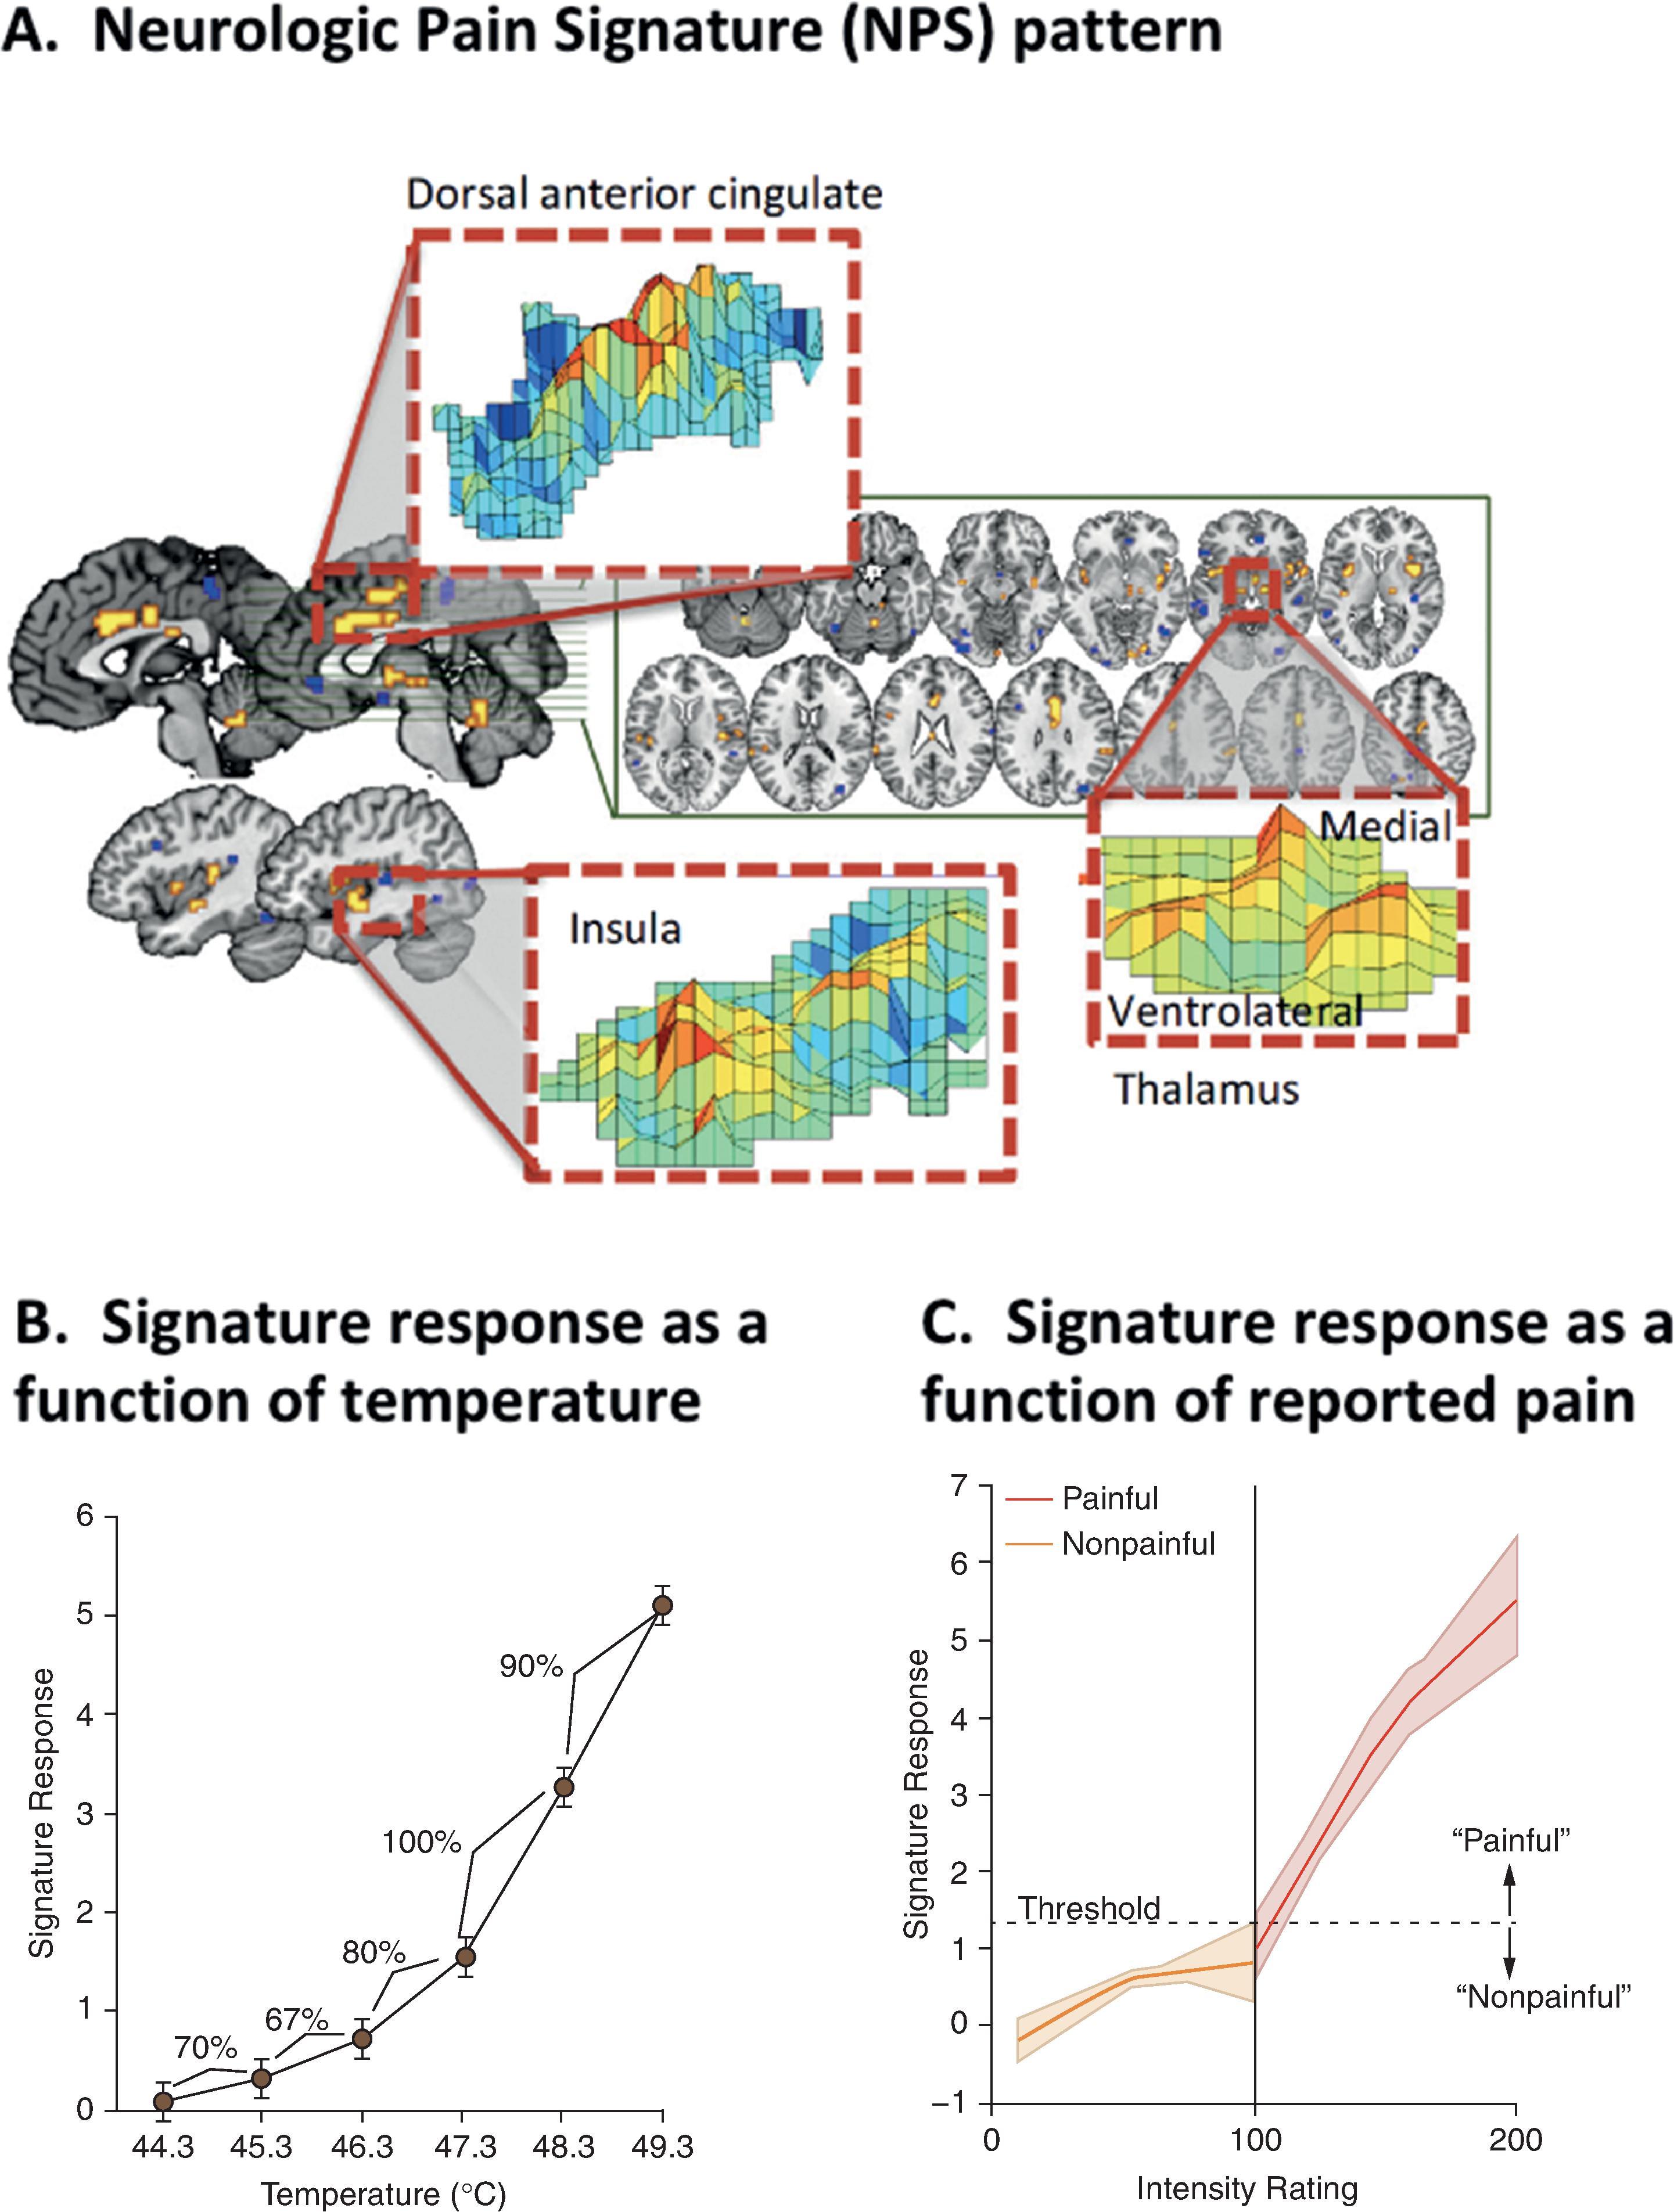 Figure 10.2, Neurologic Pain Signature (NPS). A, The NPS pattern. The map shows weights that exceed a threshold (false discovery rate of q<0.05) for the display. Insets stress the importance of multivariate patterns in the three key regions. Adapted from Zaki et al. (2016). 172 B and C, In a separate study, the NPS signature response score tracked the temperature of the stimulation (percentages represent discrimination accuracies between pairs of adjacent temperature levels), as well as subjectively reported pain (100 = pain threshold). Adapted from Wager et al. 27